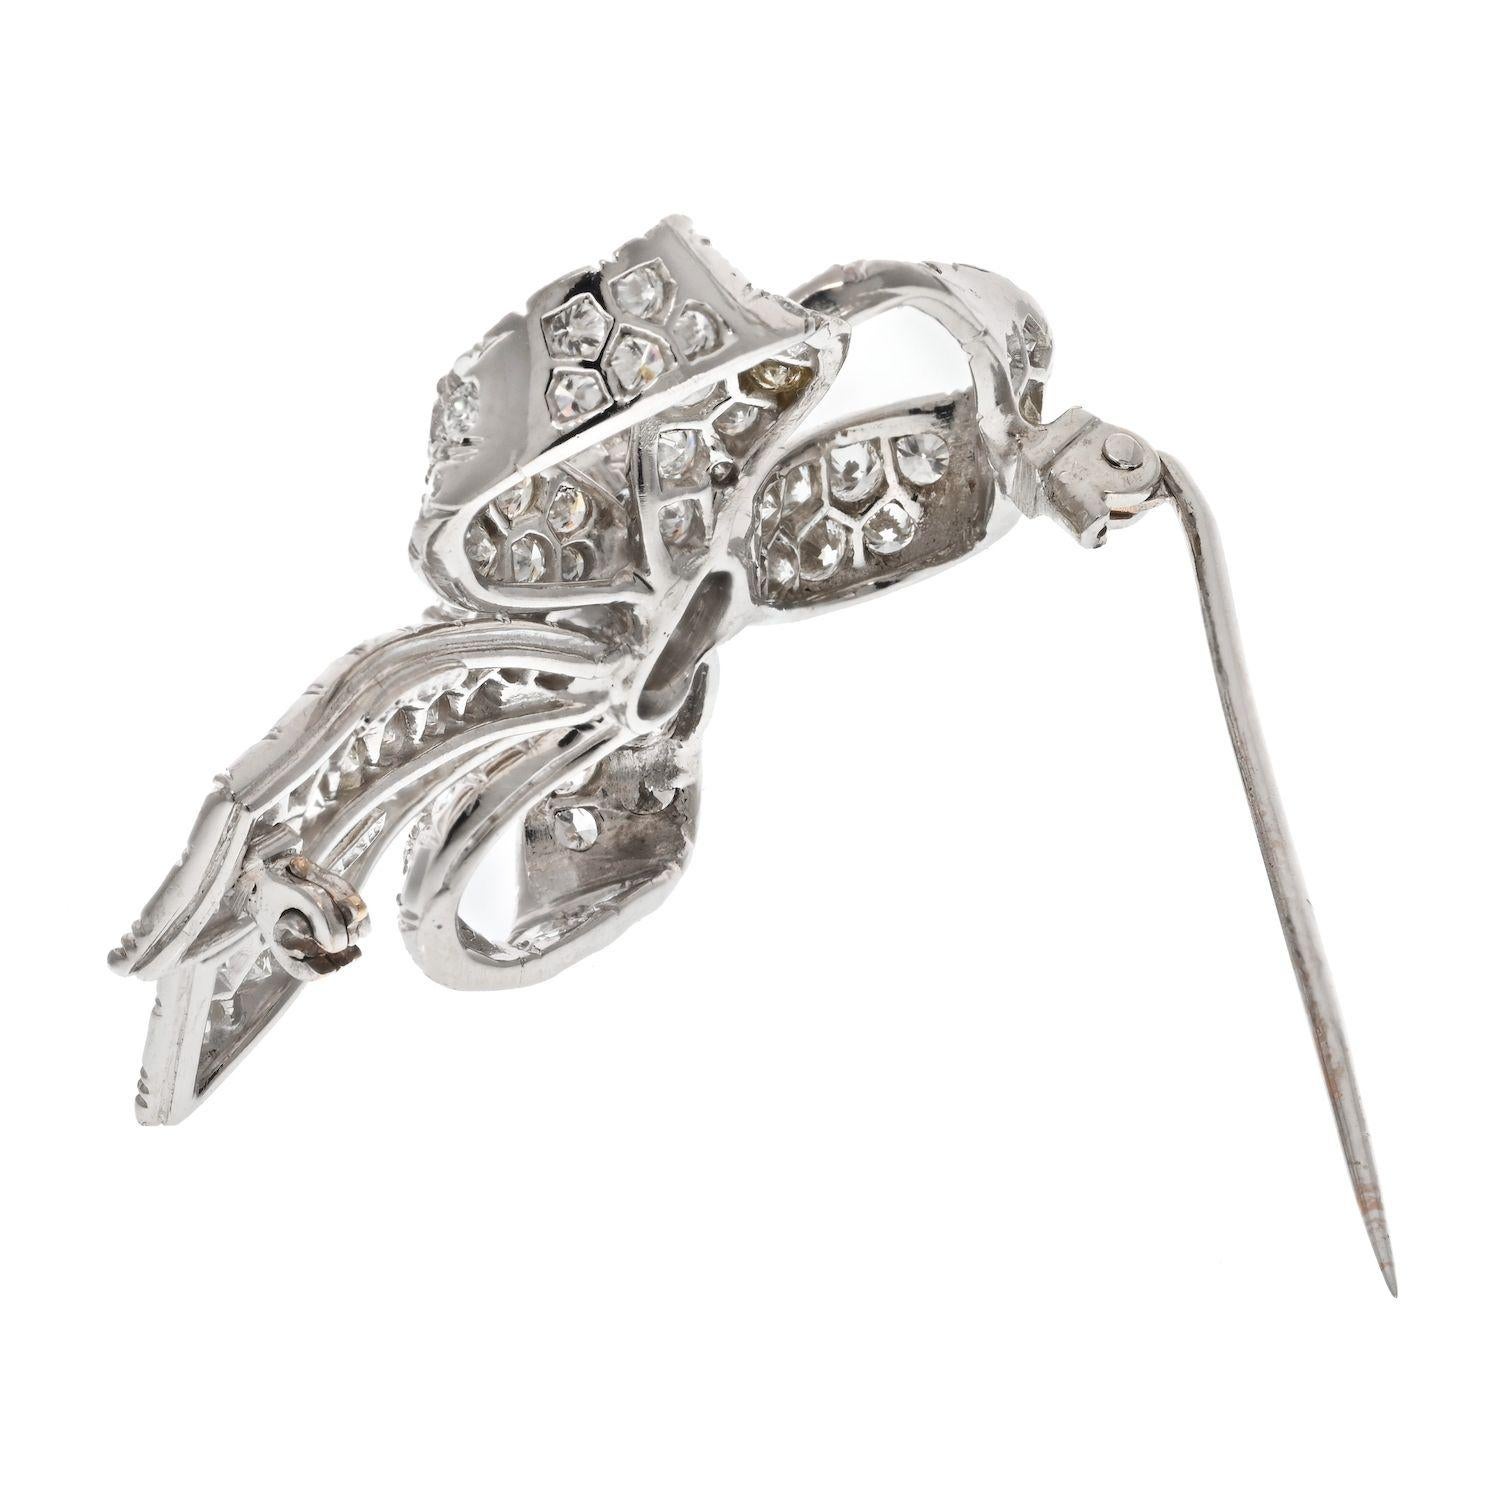 Beautiful as always we love brooches from Tiffany & Co. Always high-quality diamonds and craftsmanship that will last generations. 

Rest assured this brooch has no wear on it! 

We feel that your loved one will adore this brooch as a gift this